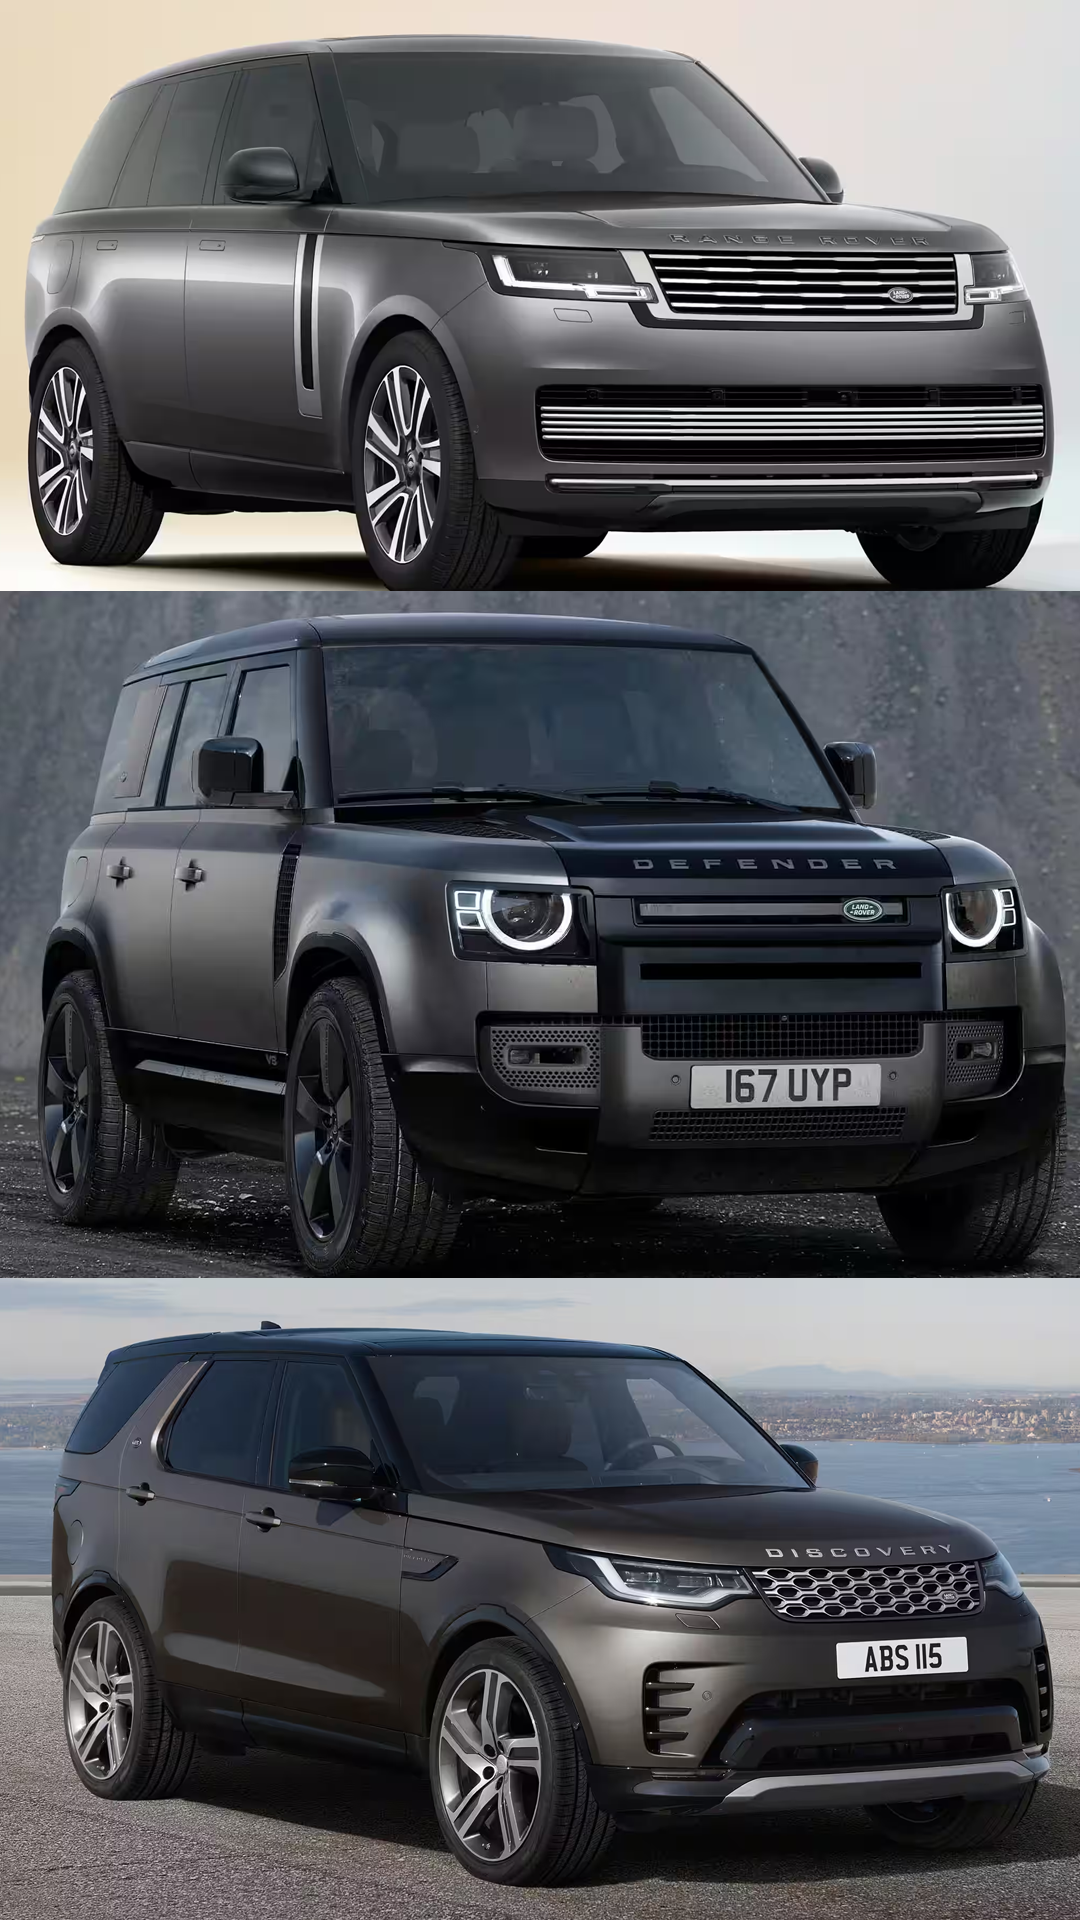 Defender to Range Rover: All Land Rover Cars Sold In India, Land